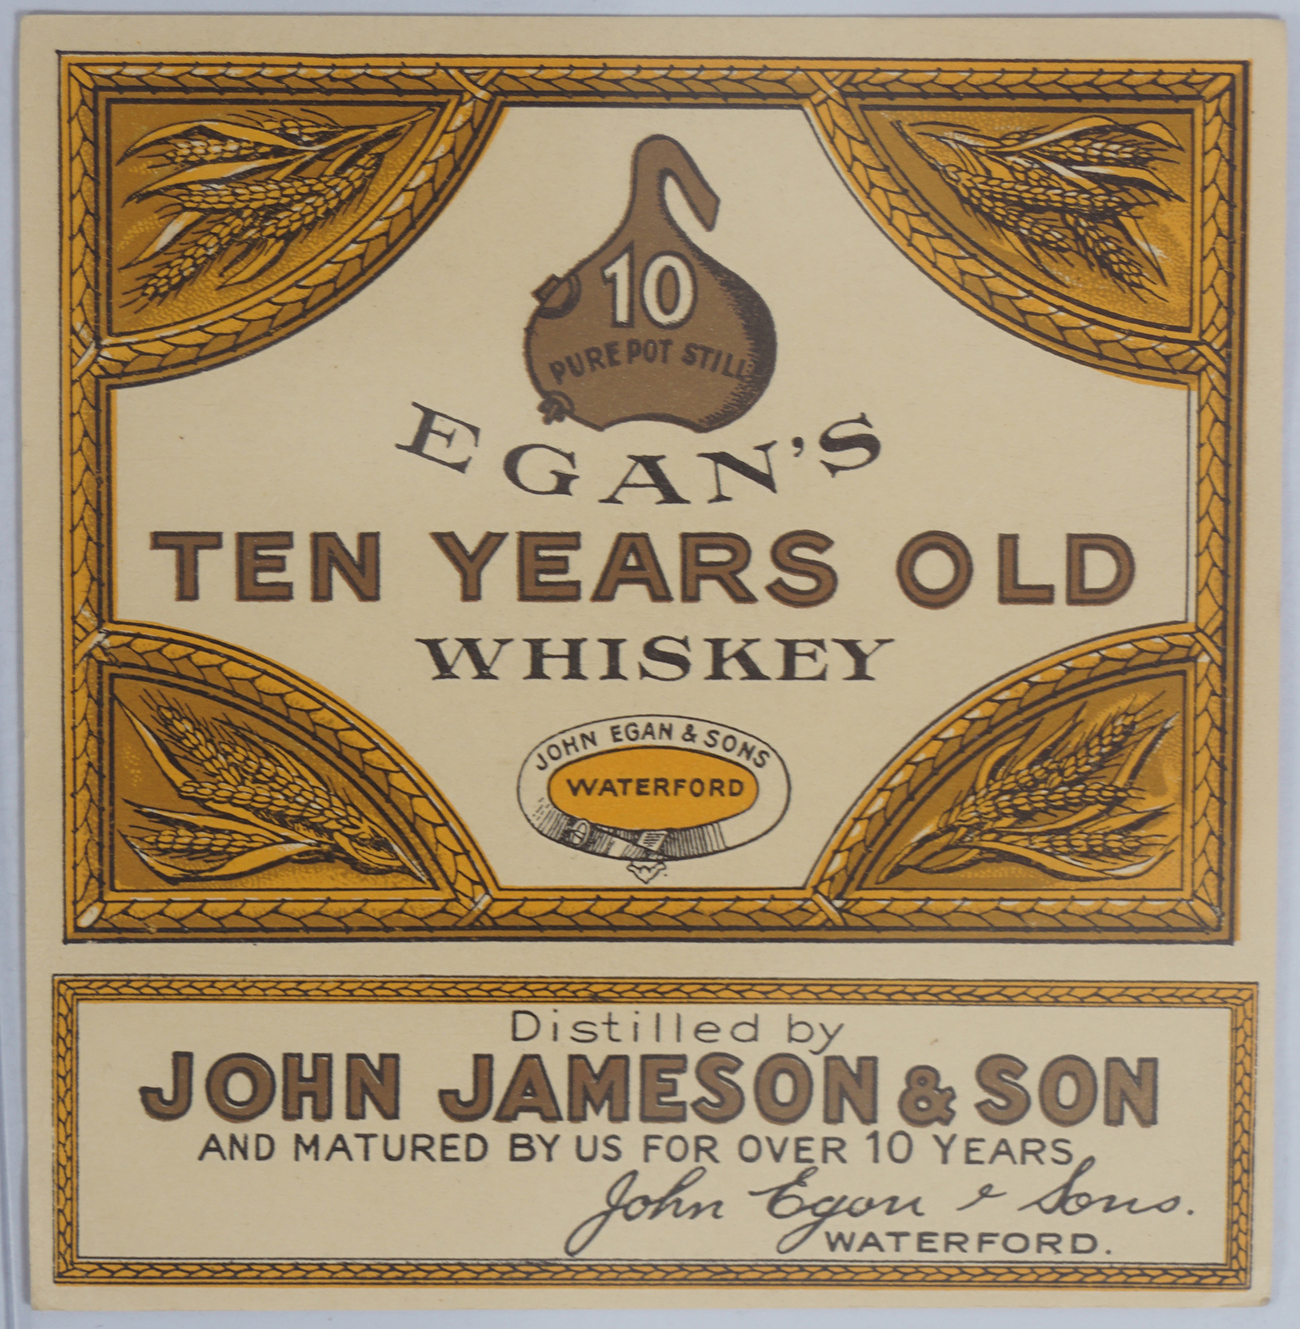 RARE COLLECTION OF IRISH WHISKEY LABELS - Image 9 of 16